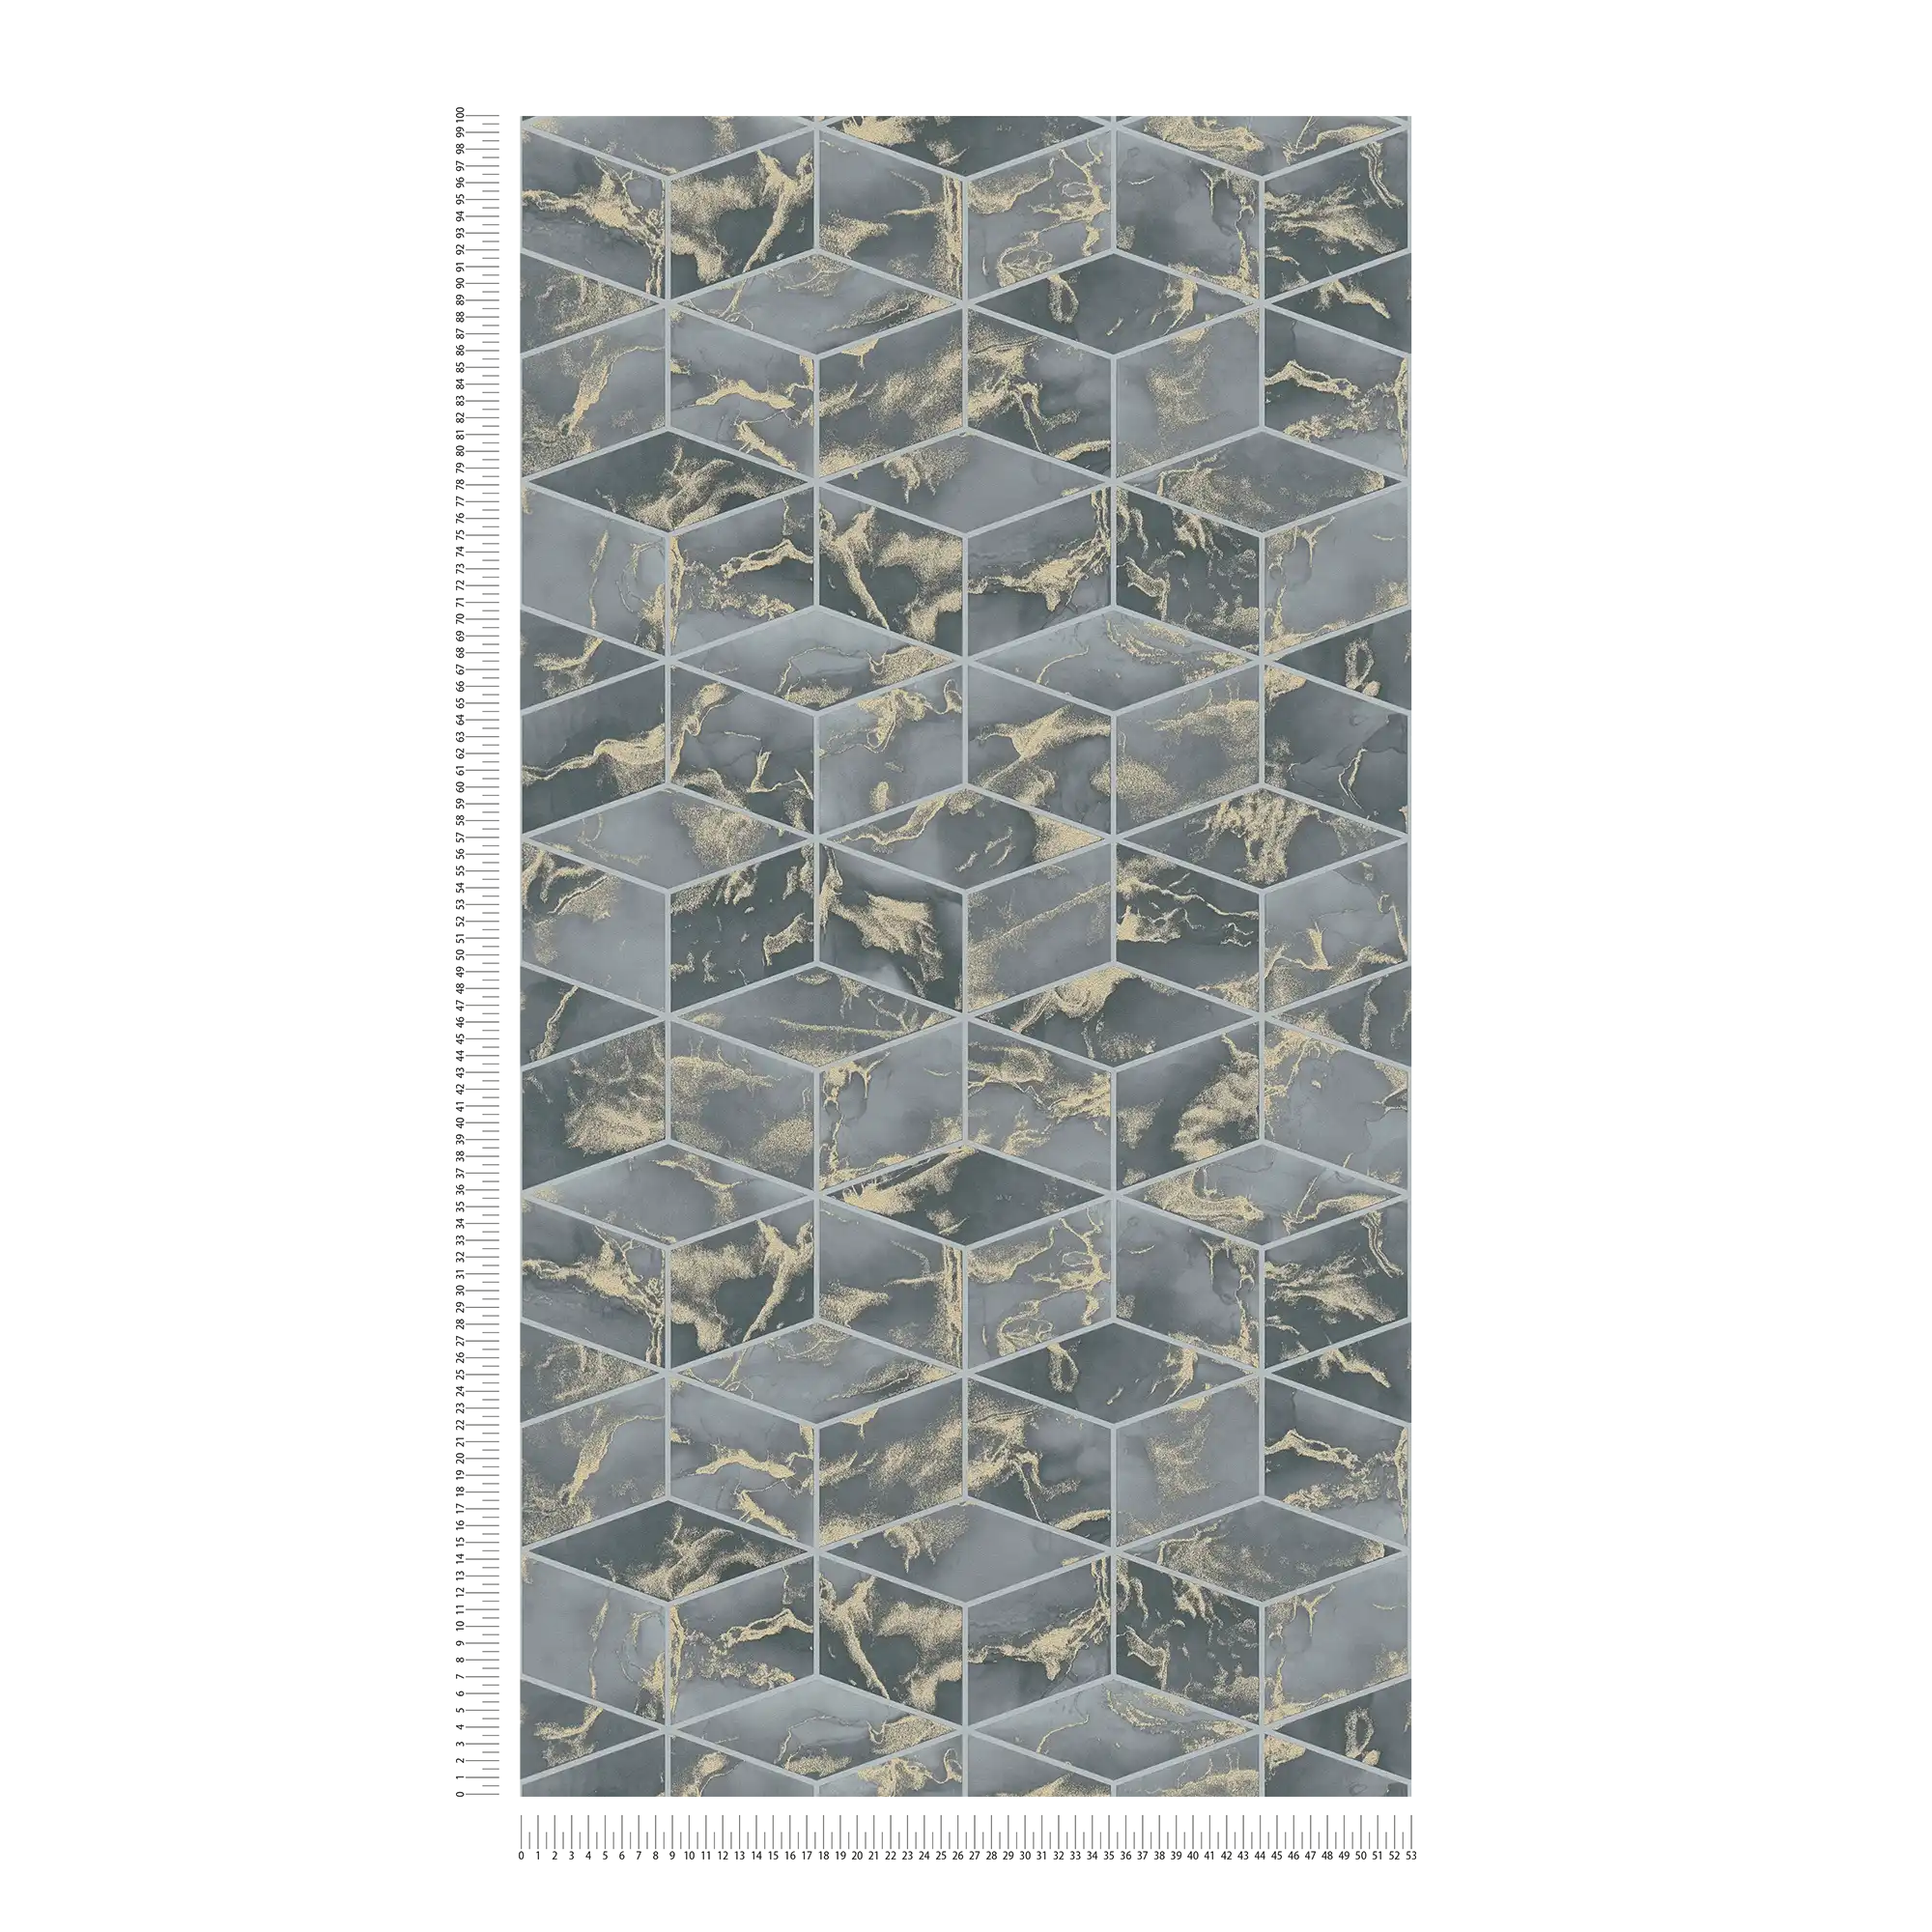             Marble wallpaper tile look with gold accent - grey, green, metallic
        